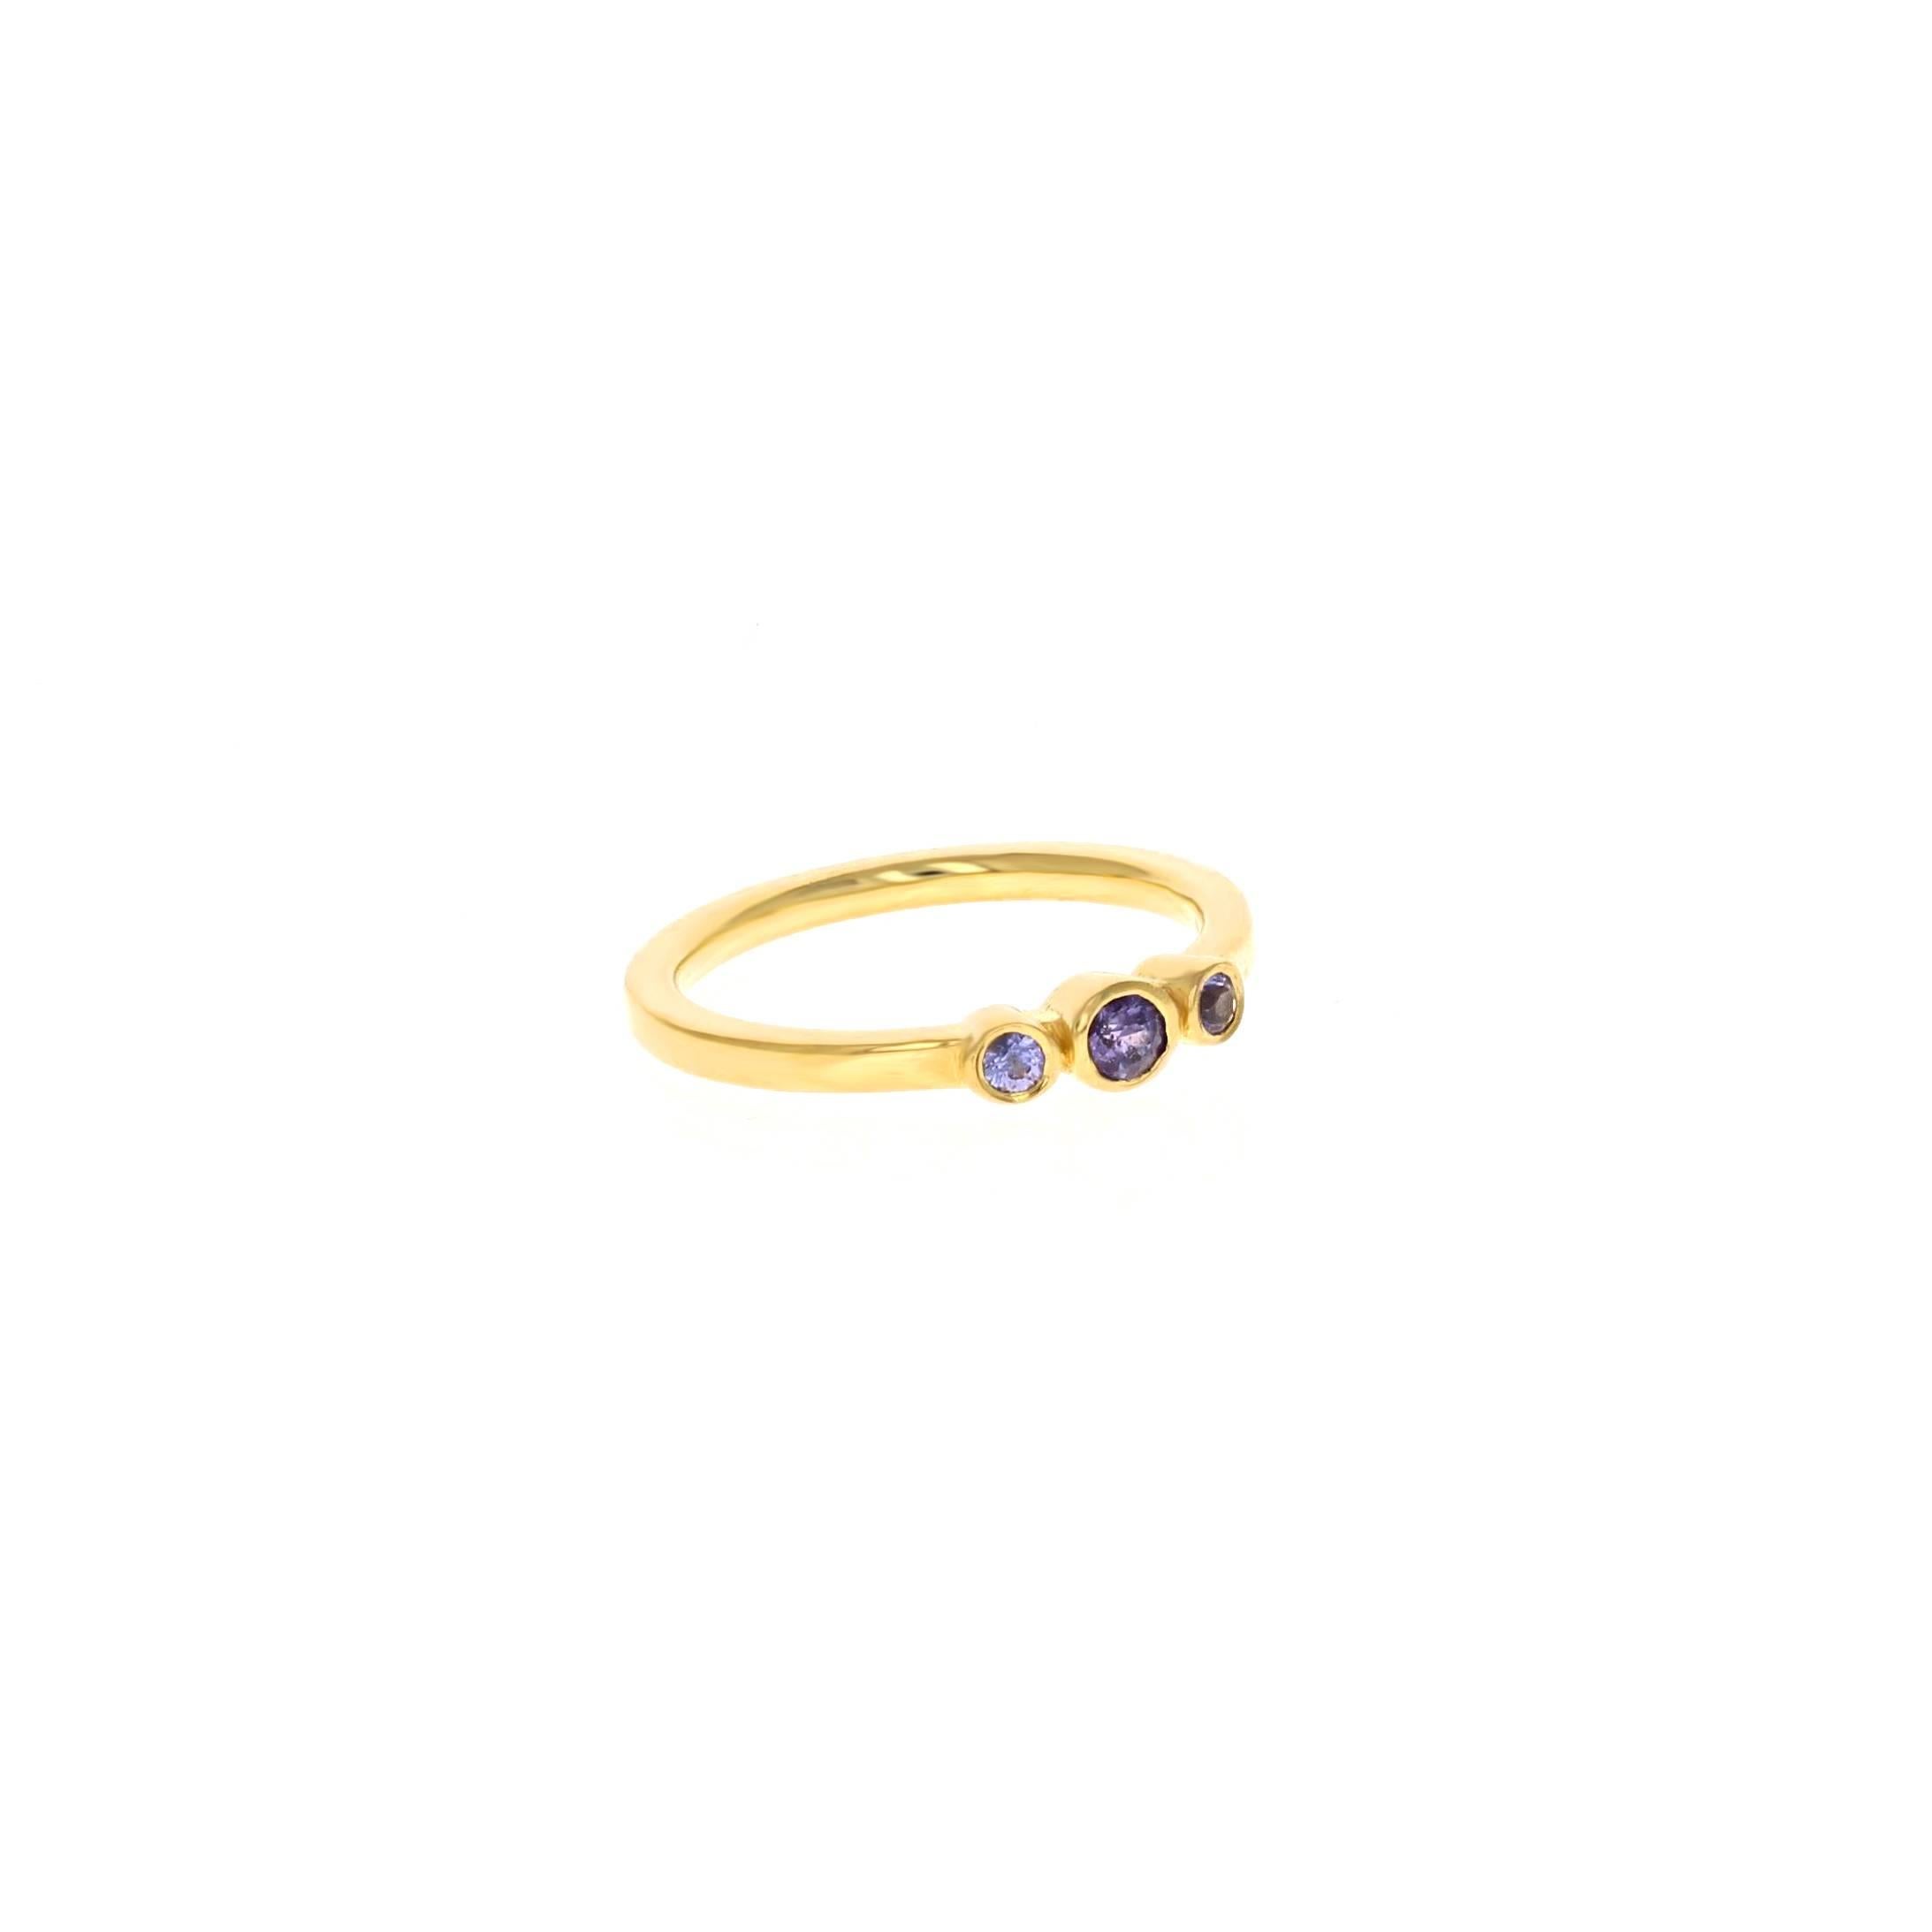 The Petite Alice is three stone ring. The number 3 stands in symbolism of the planet Jupiter which governs good fortune, wealth and success.  This ring in photos is a size 6 and ready to ship. Please contact for another size.

• 18kt yellow gold
•